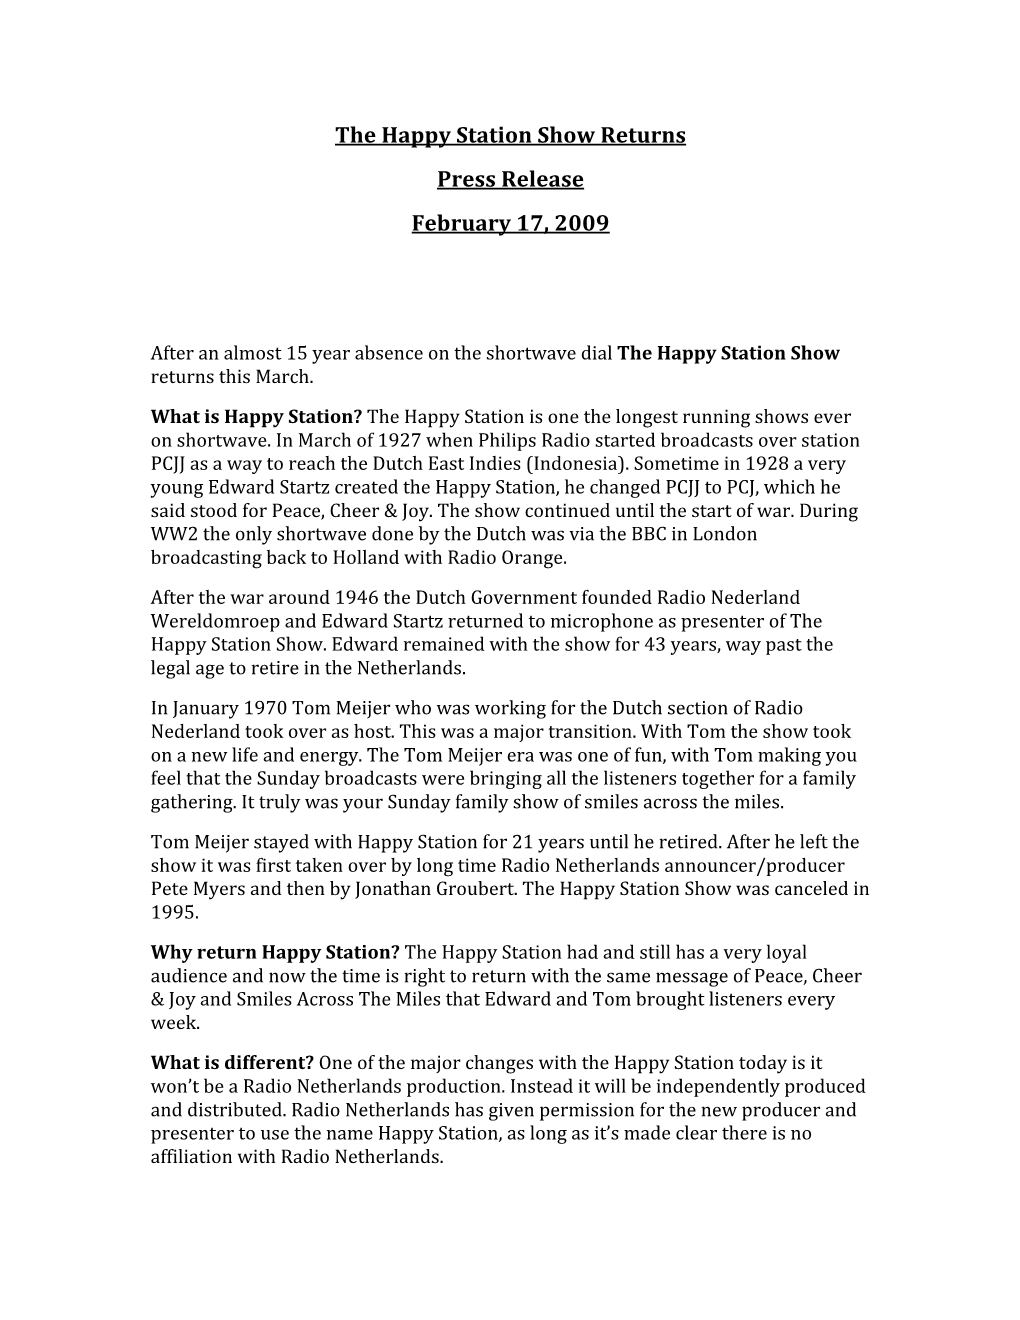 Happy Station Show Returns Press Release February 17, 2009